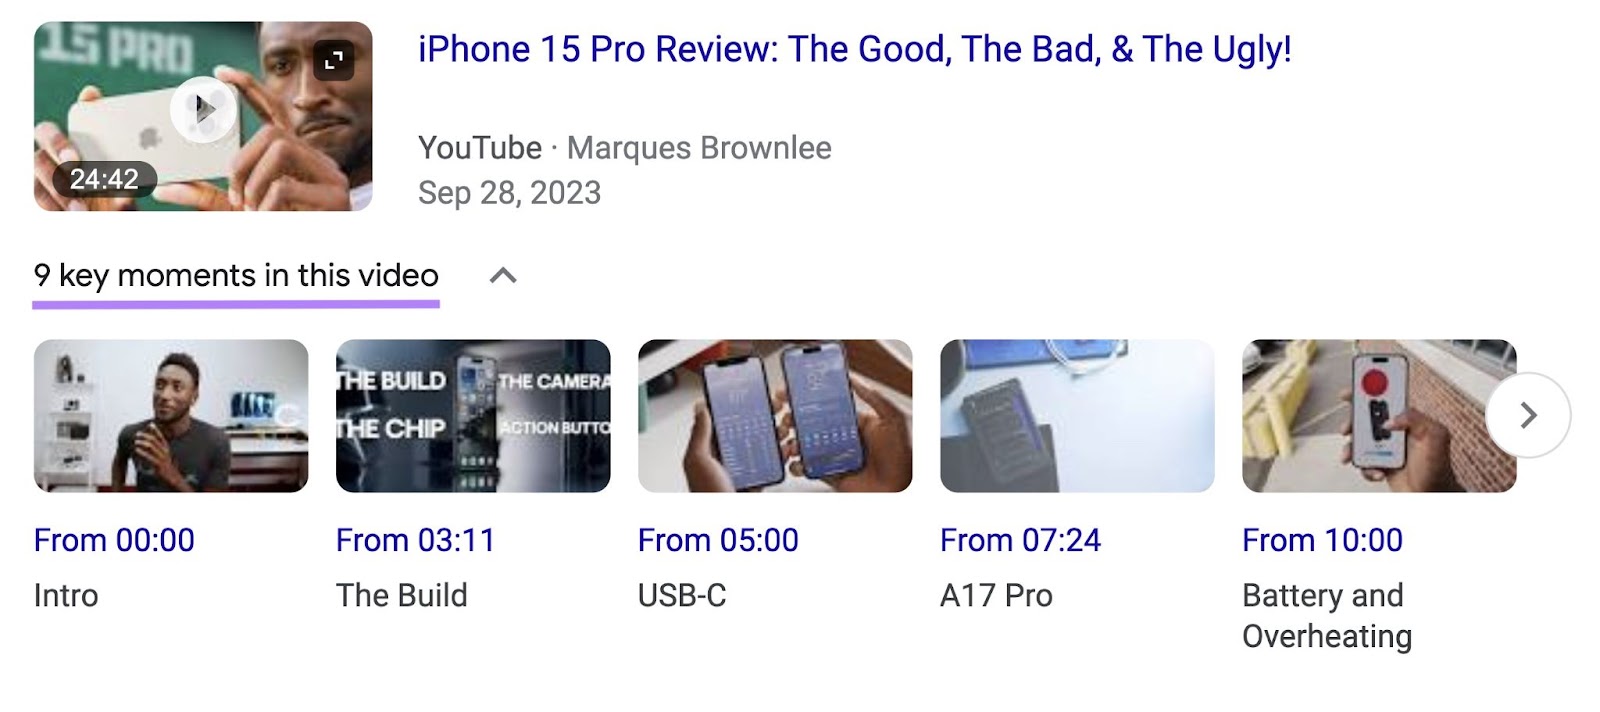 "9 key moments in this video" shown in Google SERP under Marques Brownlee's video